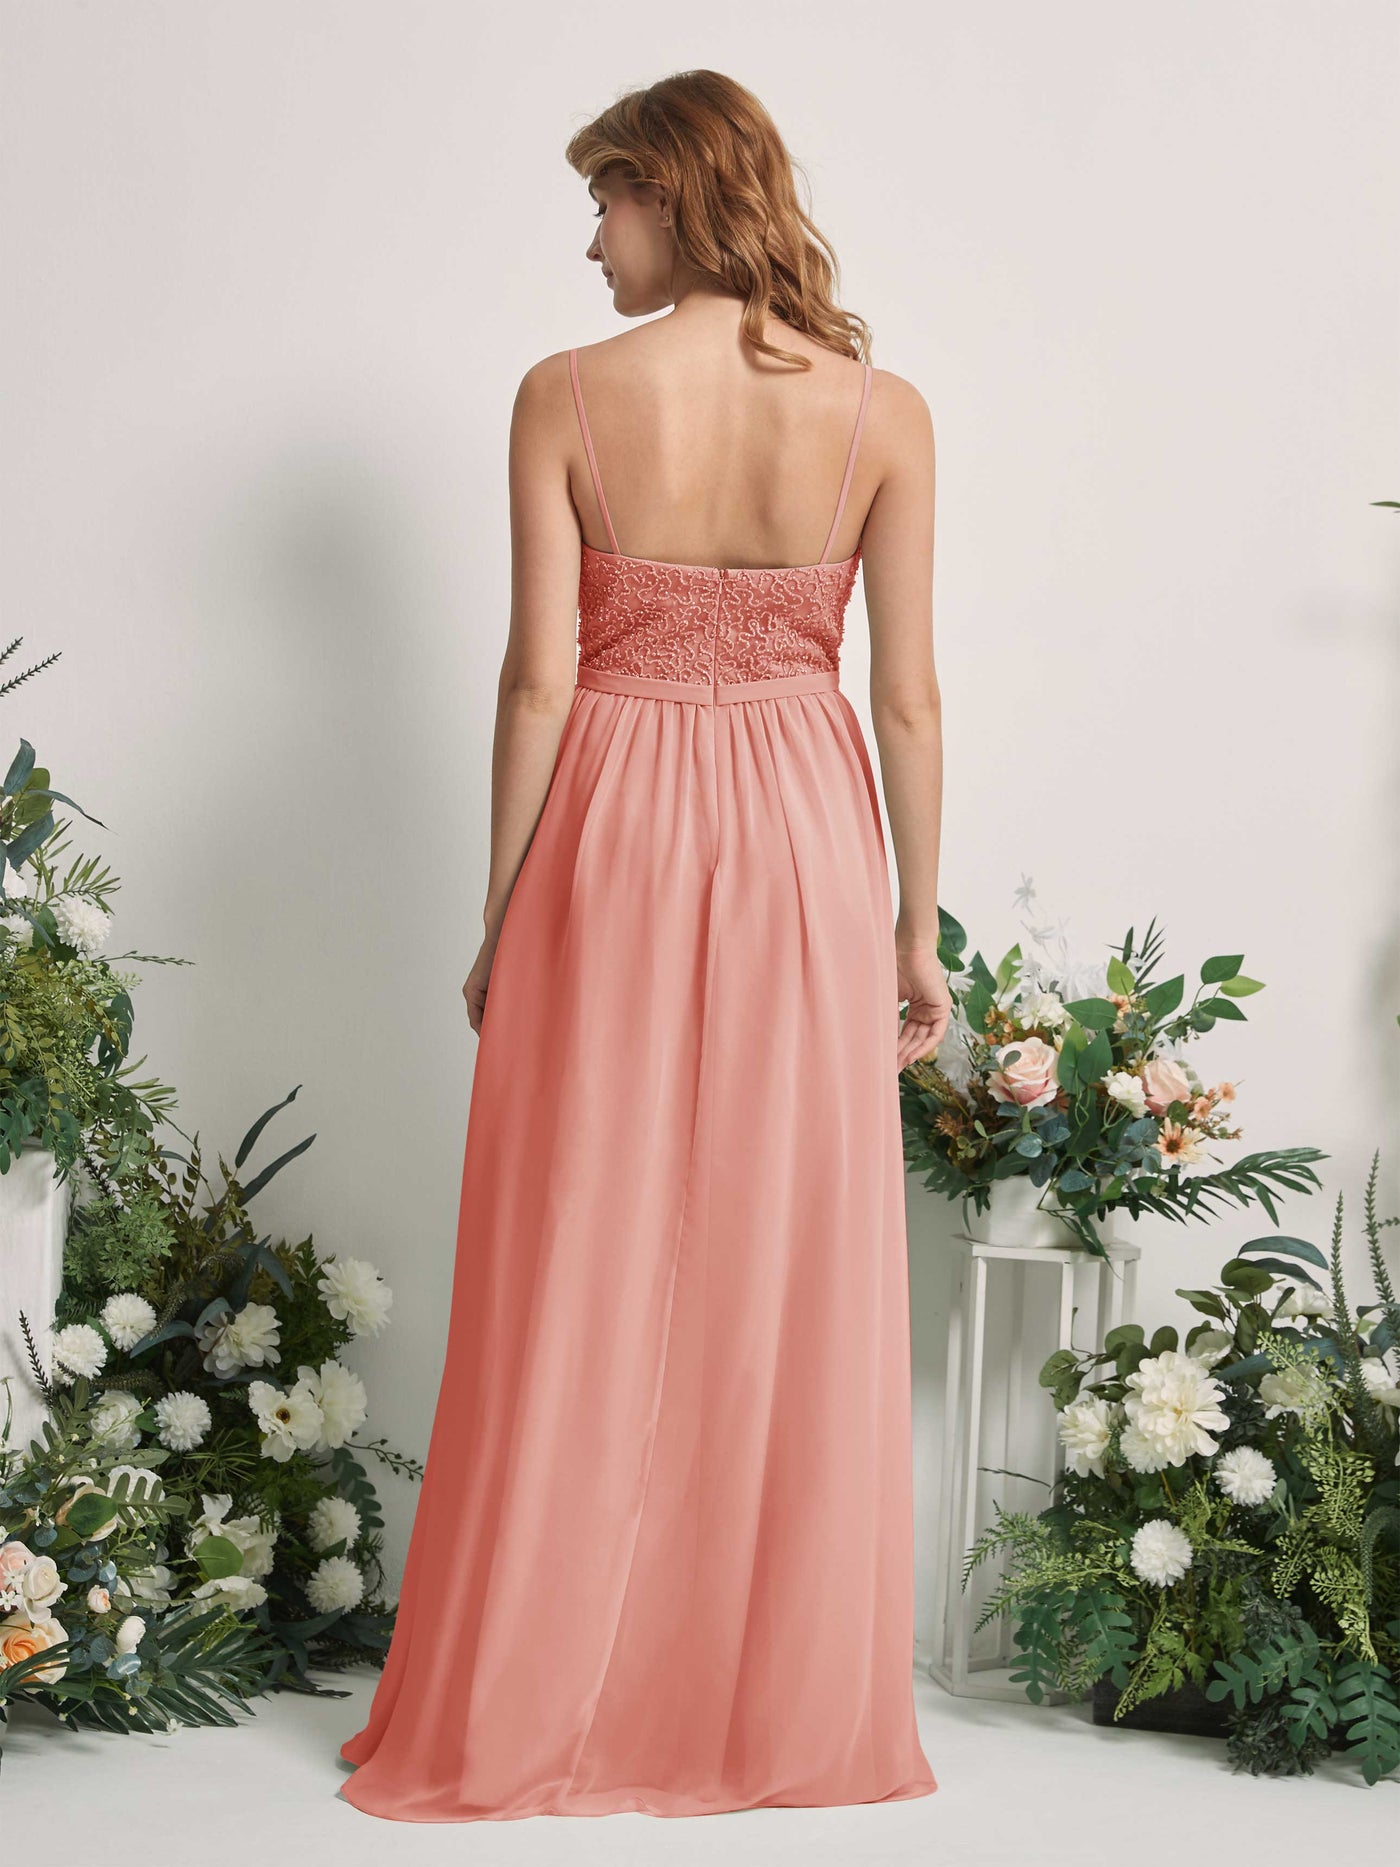 Champagne Rose Bridesmaid Dresses A-line Open back Spaghetti-straps Sleeveless Dresses (83220106)#color_champagne-rose